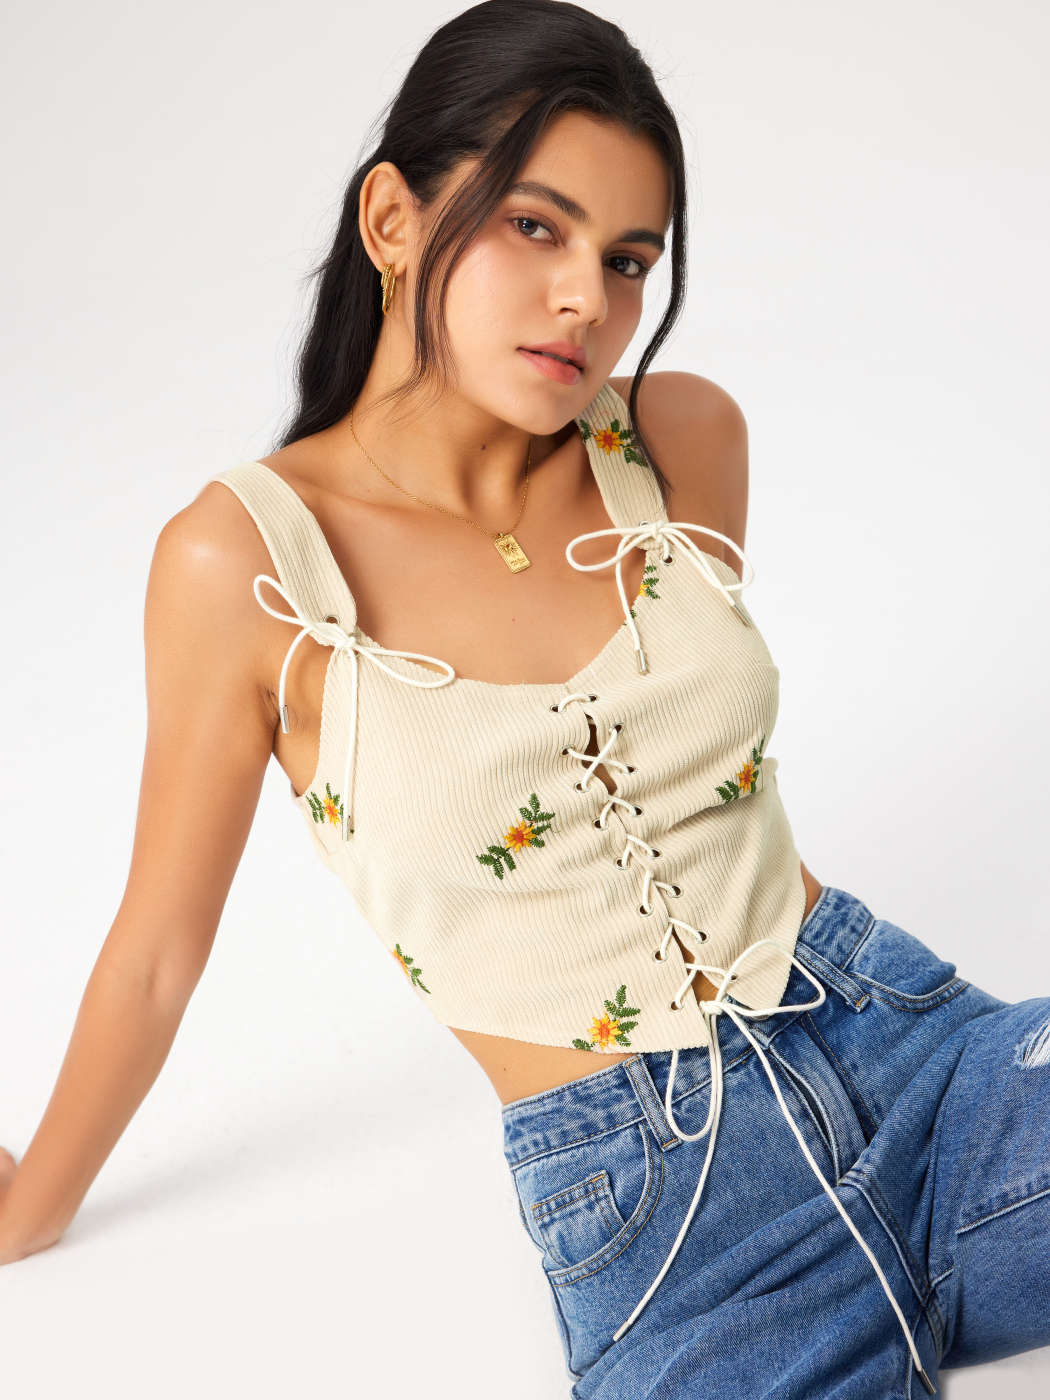 Women's Spaghetti Strap Bustier Top Floral Lace Crop Cami Top